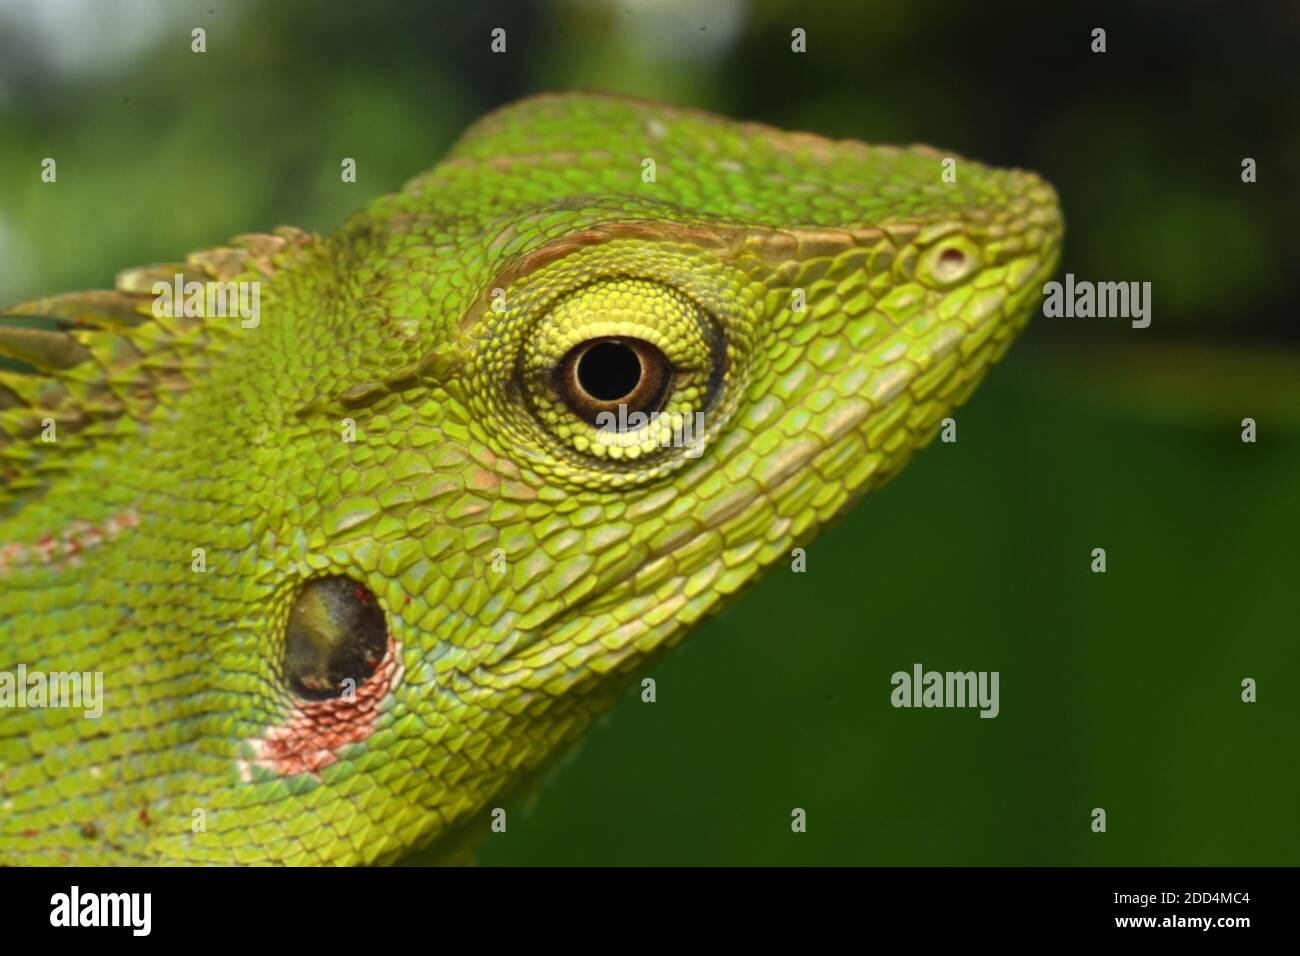 Close up view of maned forest lizard Stock Photo